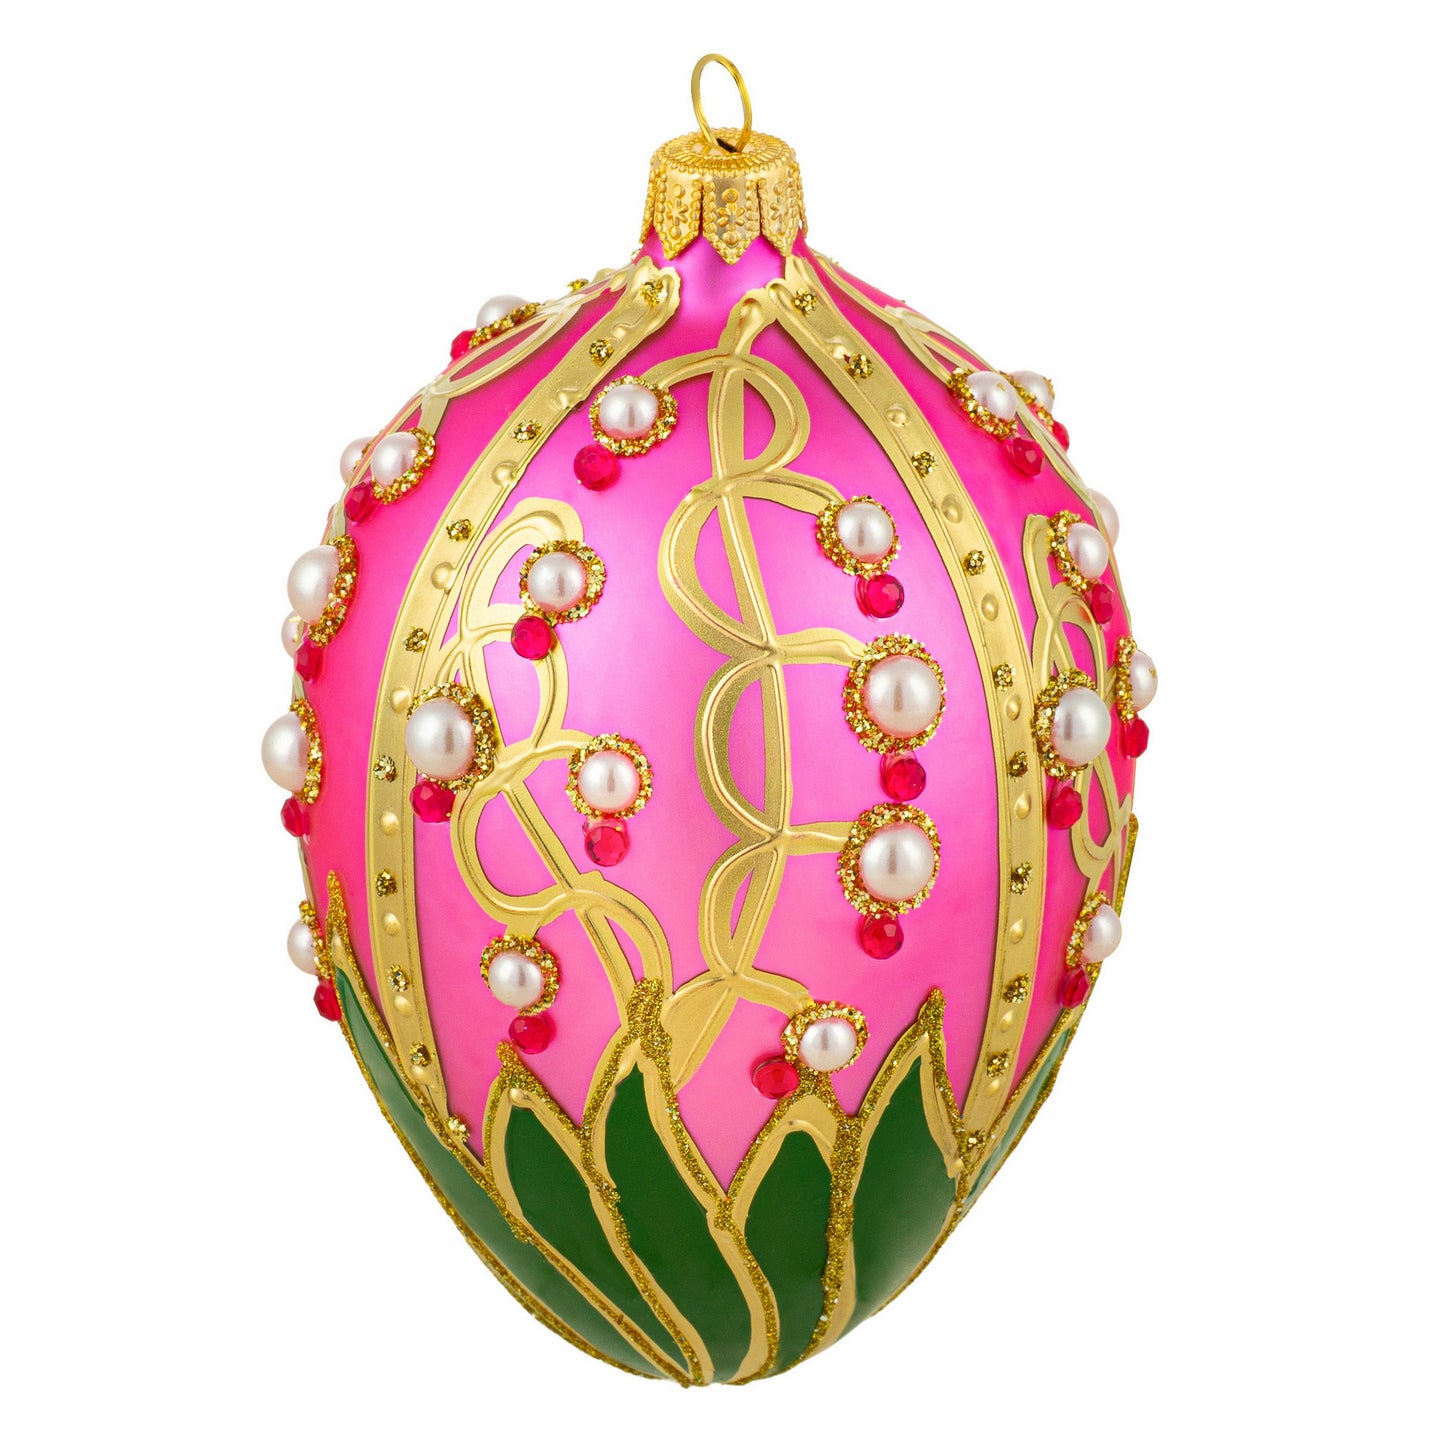 PINK FABERGÉ EGG WITH LILY OF THE VALLEY PATTERN